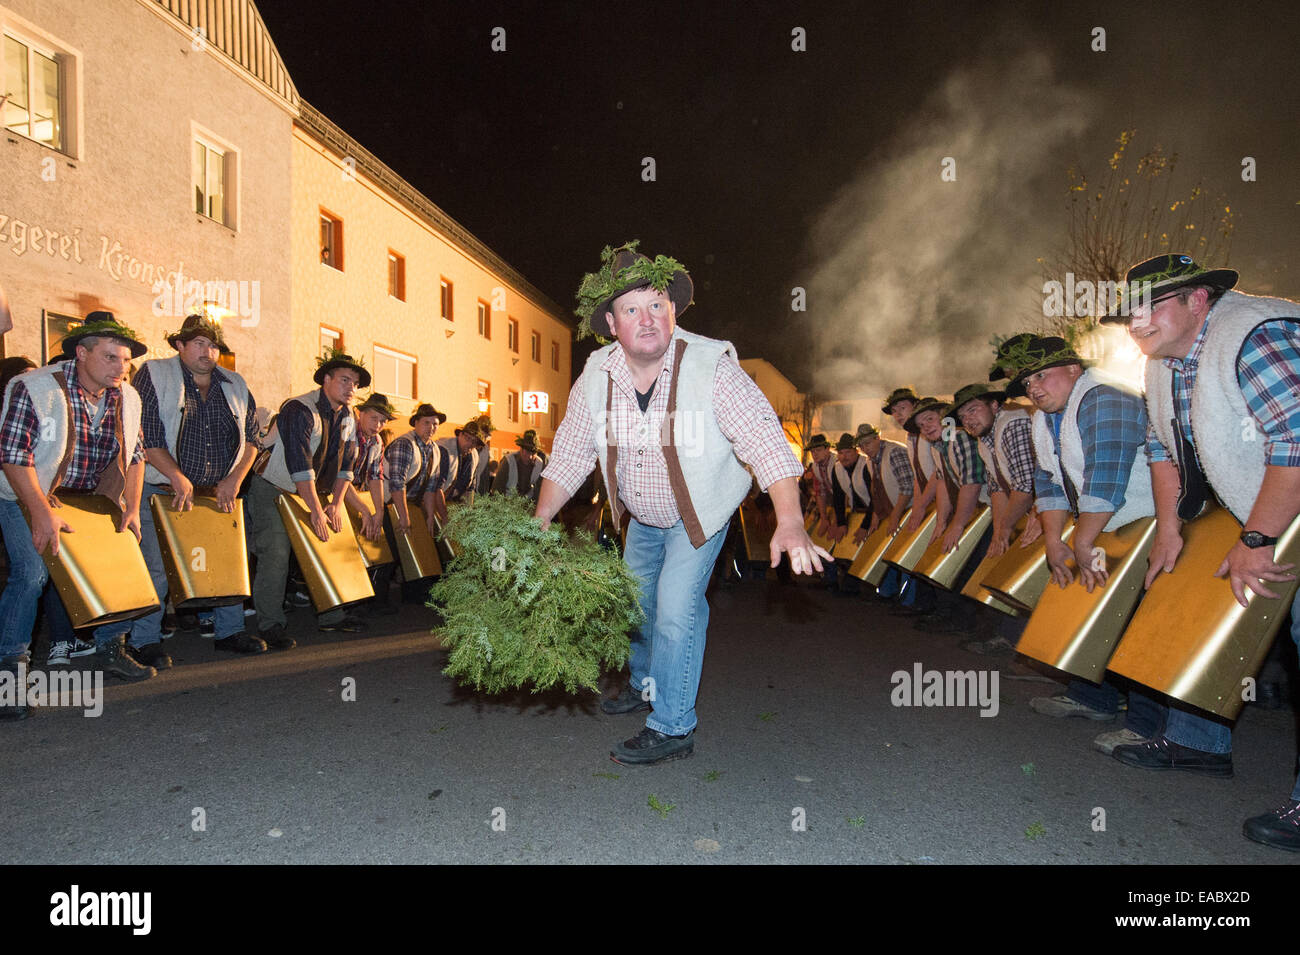 Participants in the 'Wolfsauslassen' (a local custom in the Bavarian Forest) ring large cow bells in Rinchnach, Bavaria, 10 November 2014. Around 600 boys and some girls come together every year for 'Wolfsauslassen.' According to old customs, the threatening sound of the bell chimes is meant to scare away wild animals. Photo: Armin Weigel/dpa Stock Photo